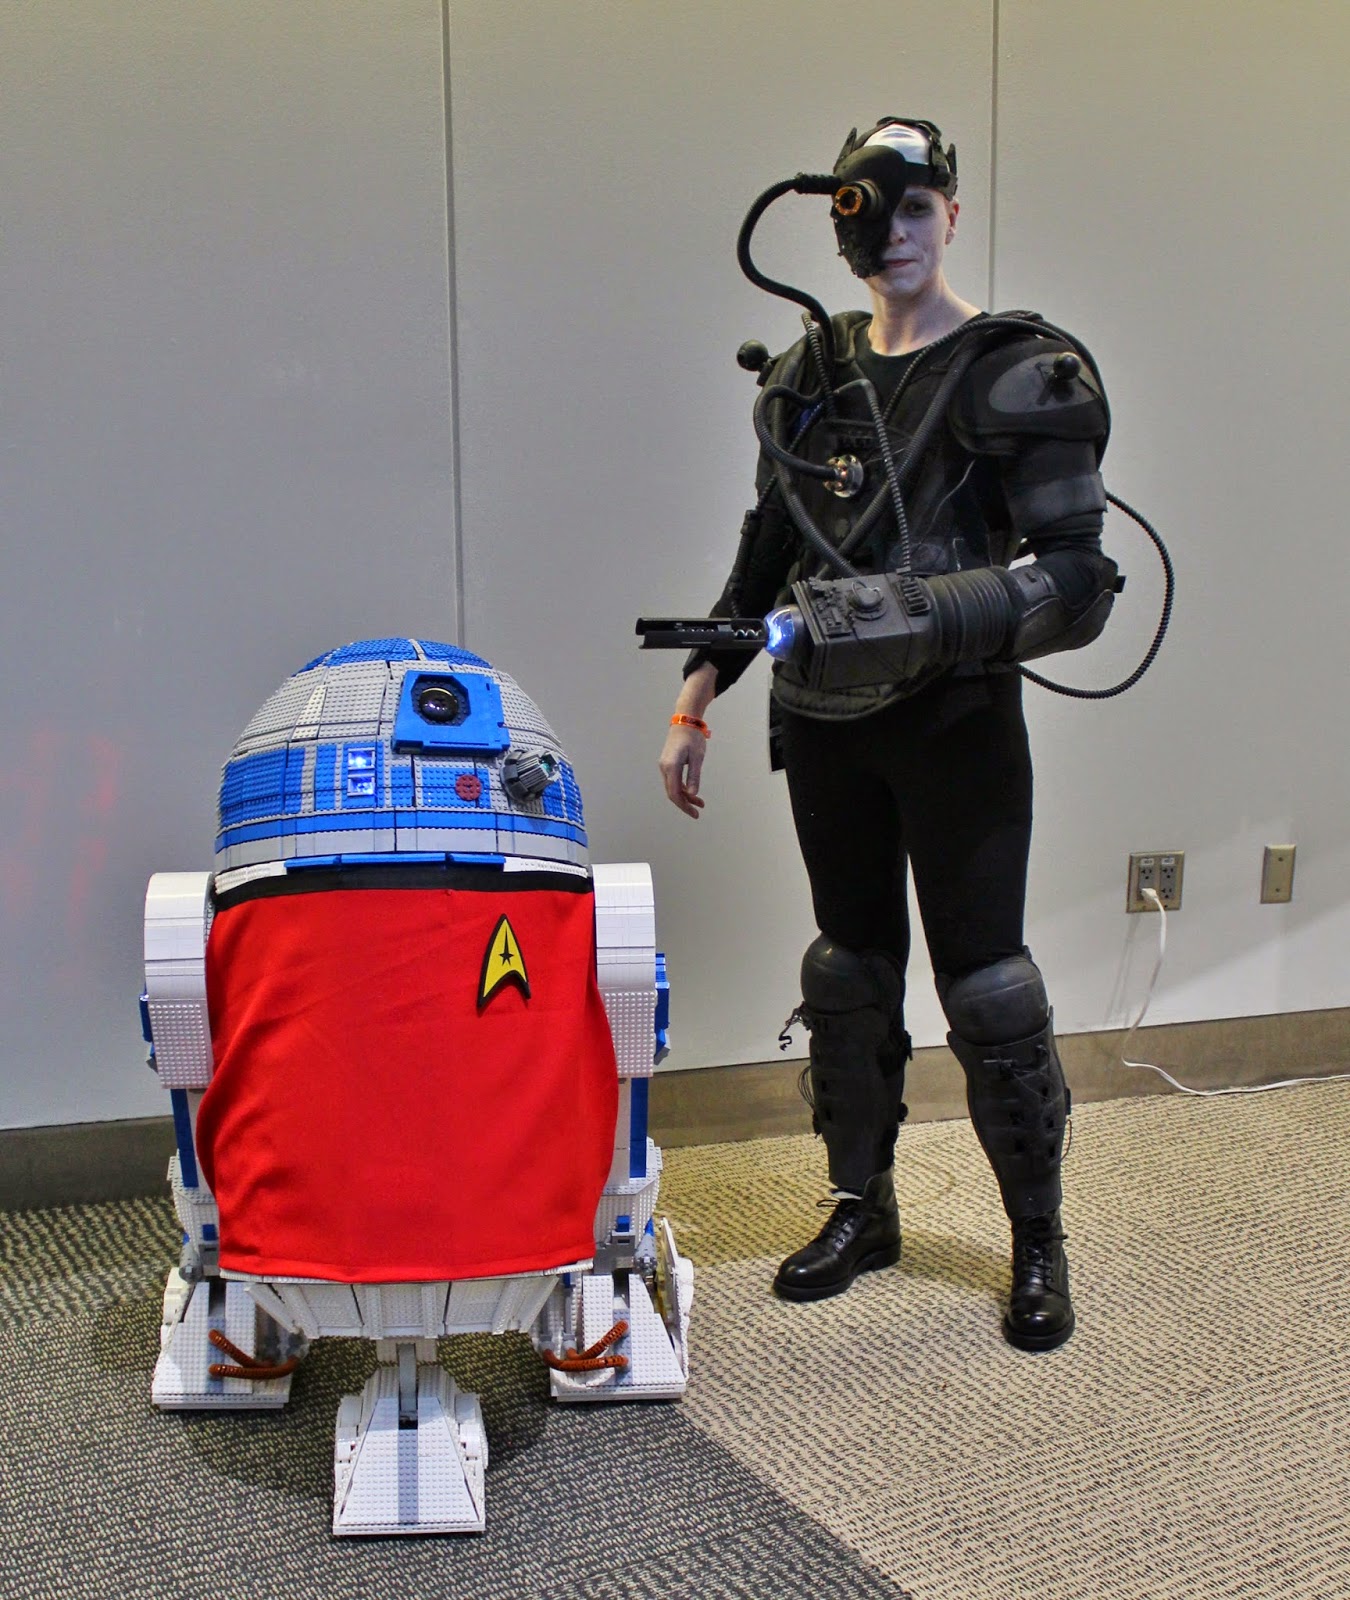 Borg Cosplay with Lego R2D2 in Red Shirt